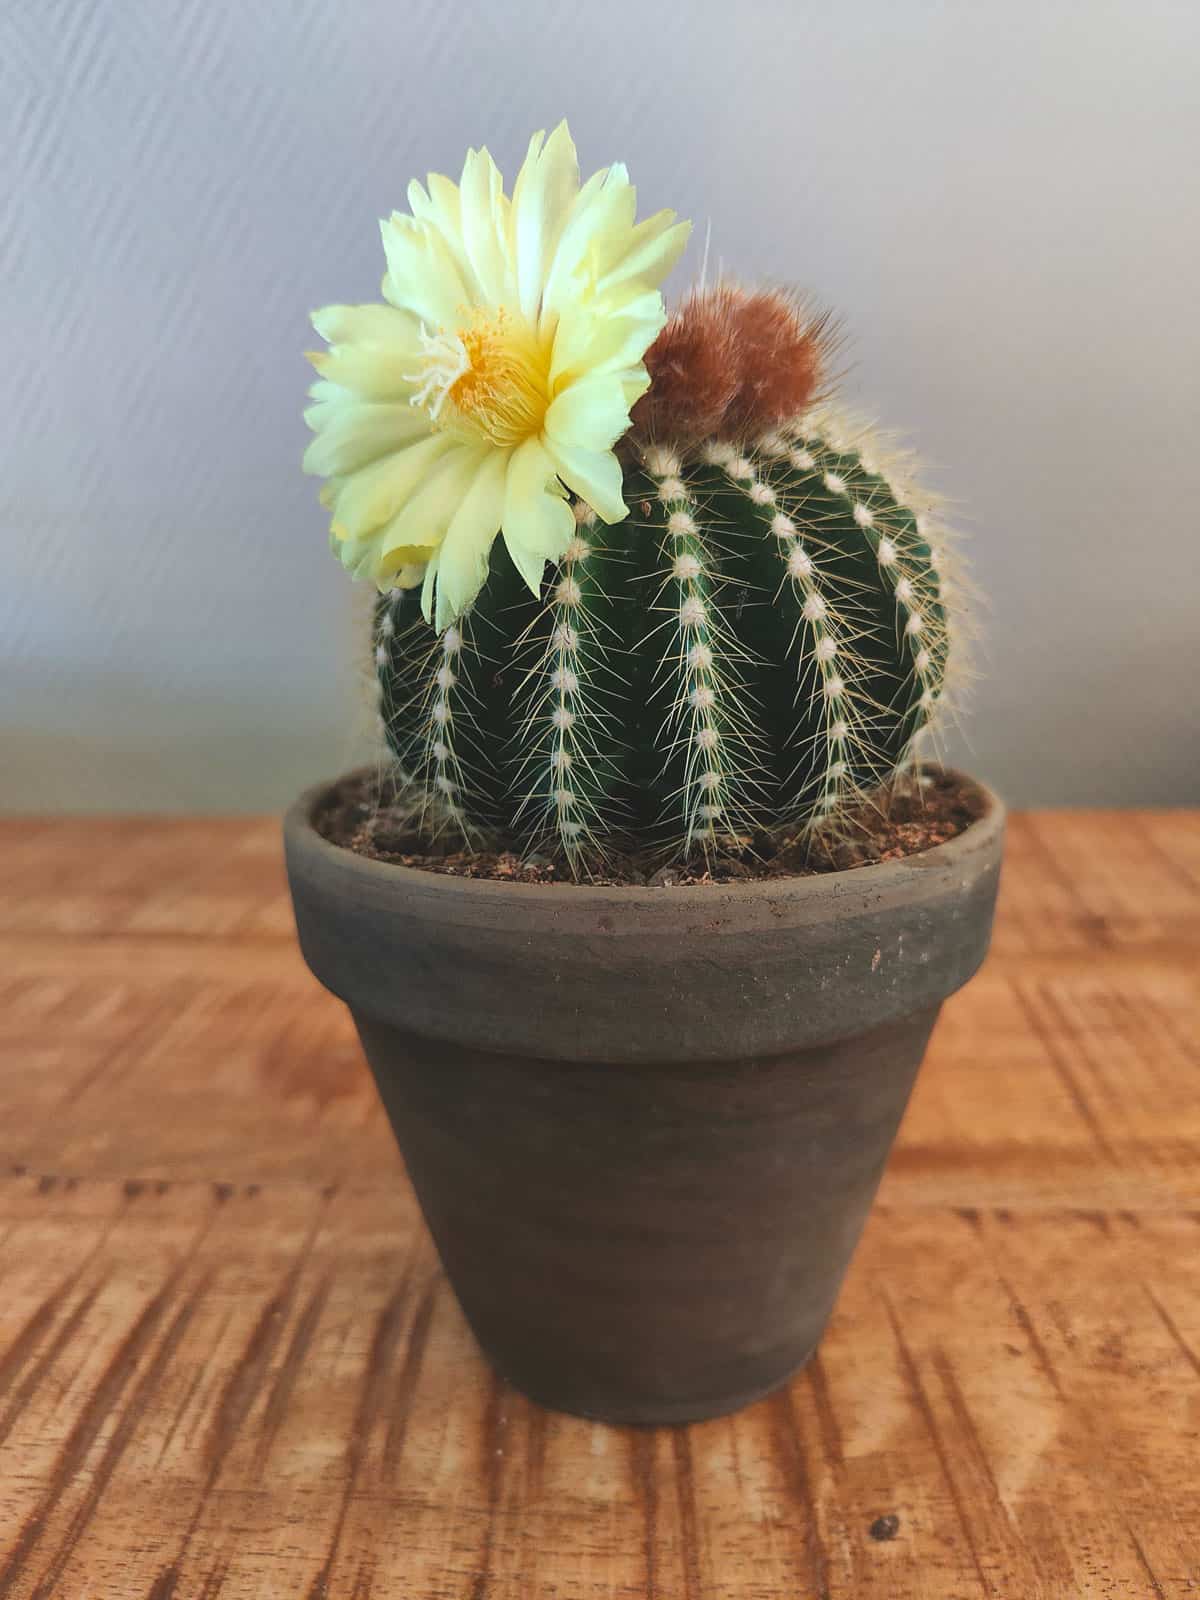 A small cactus with a blooming bright light yellow flower 